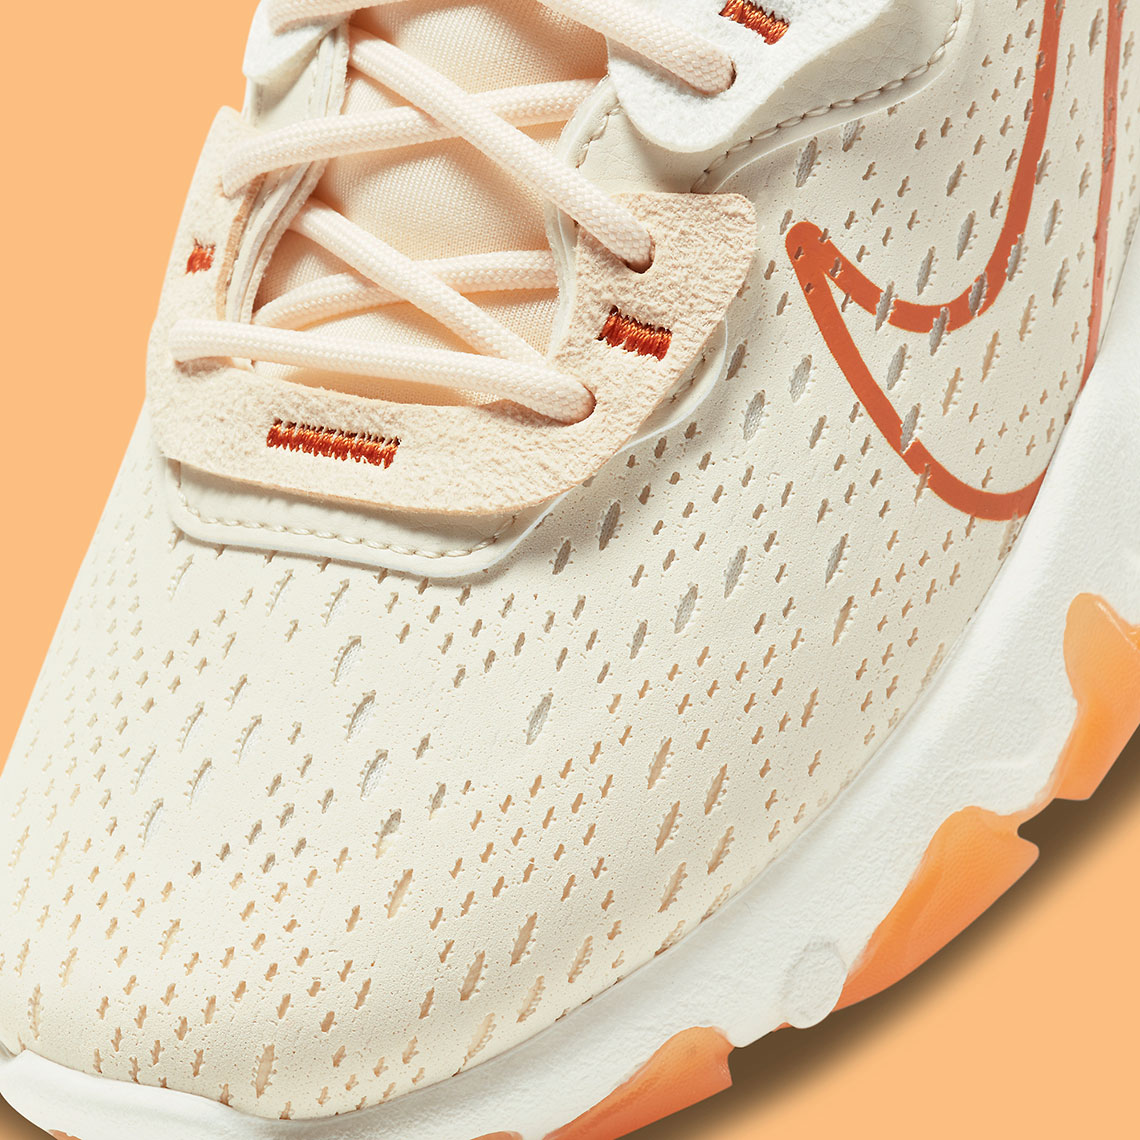 nike react vision pale ivory coconut milk